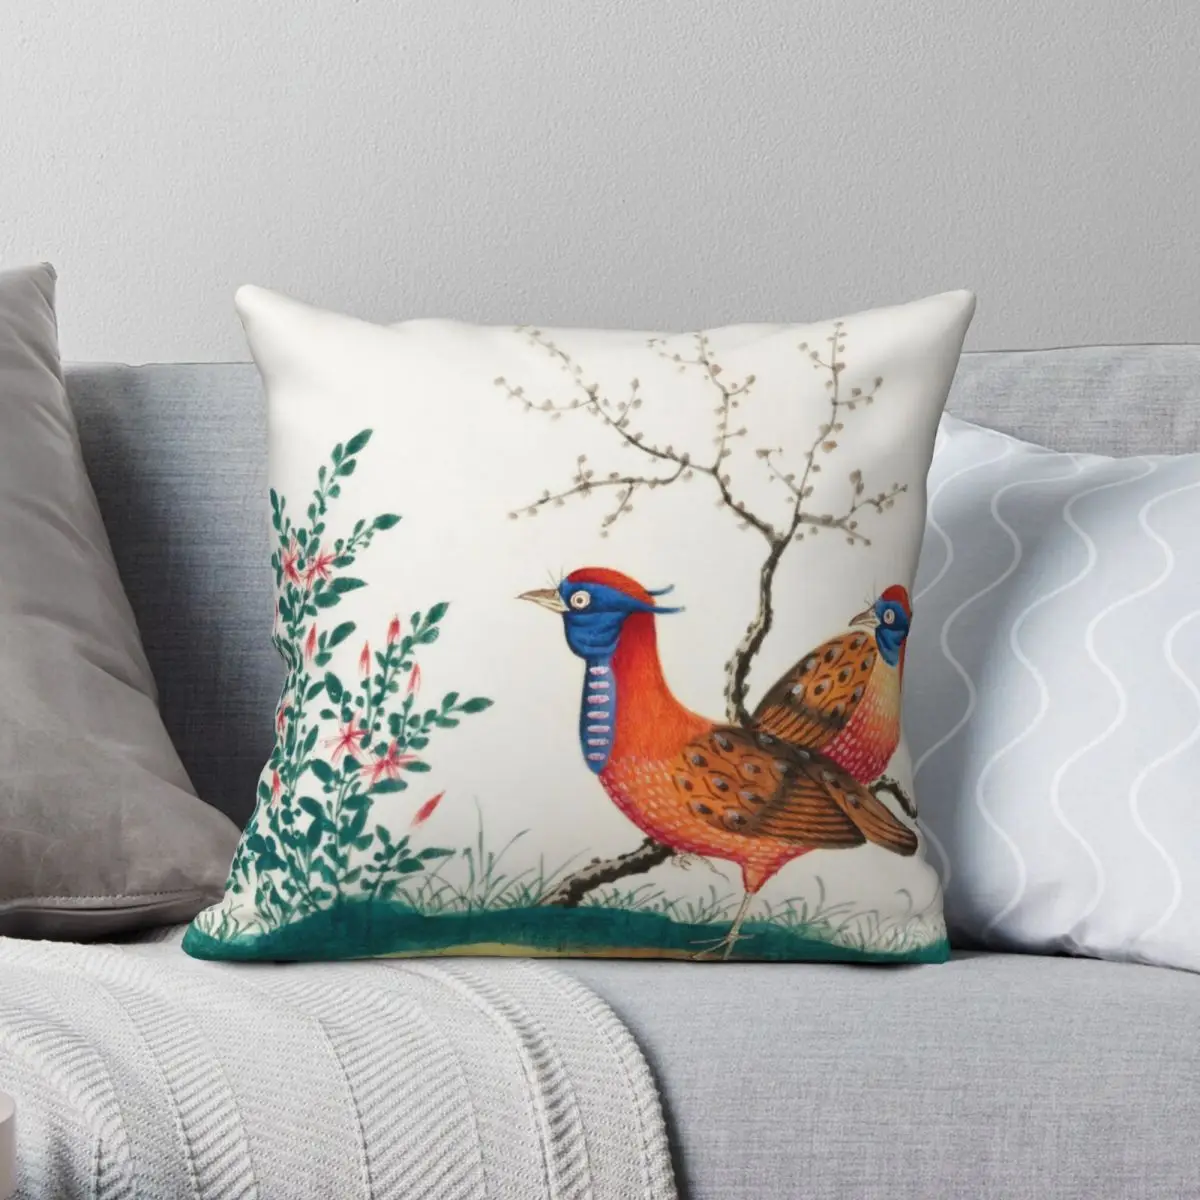 

Chinese Painting Of Birds Square Pillowcase Polyester Linen Velvet Pattern Zip Decor Throw Pillow Case Home Cushion Cover 45x45